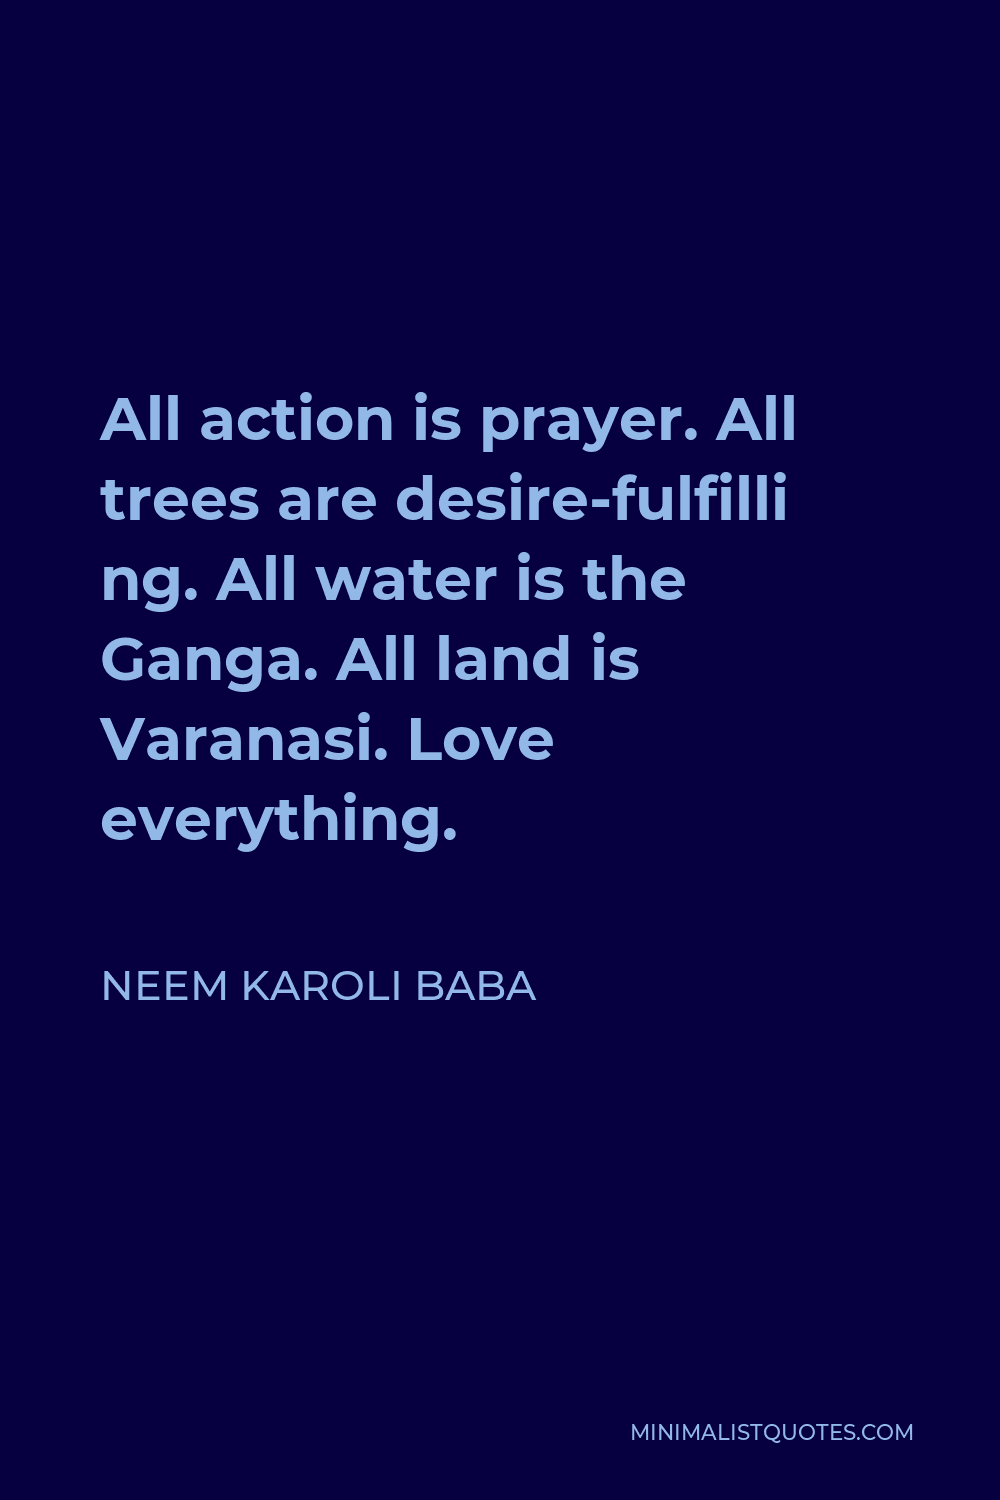 Neem Karoli Baba Quote - All action is prayer. All trees are desire-fulfilli ng. All water is the Ganga. All land is Varanasi. Love everything.